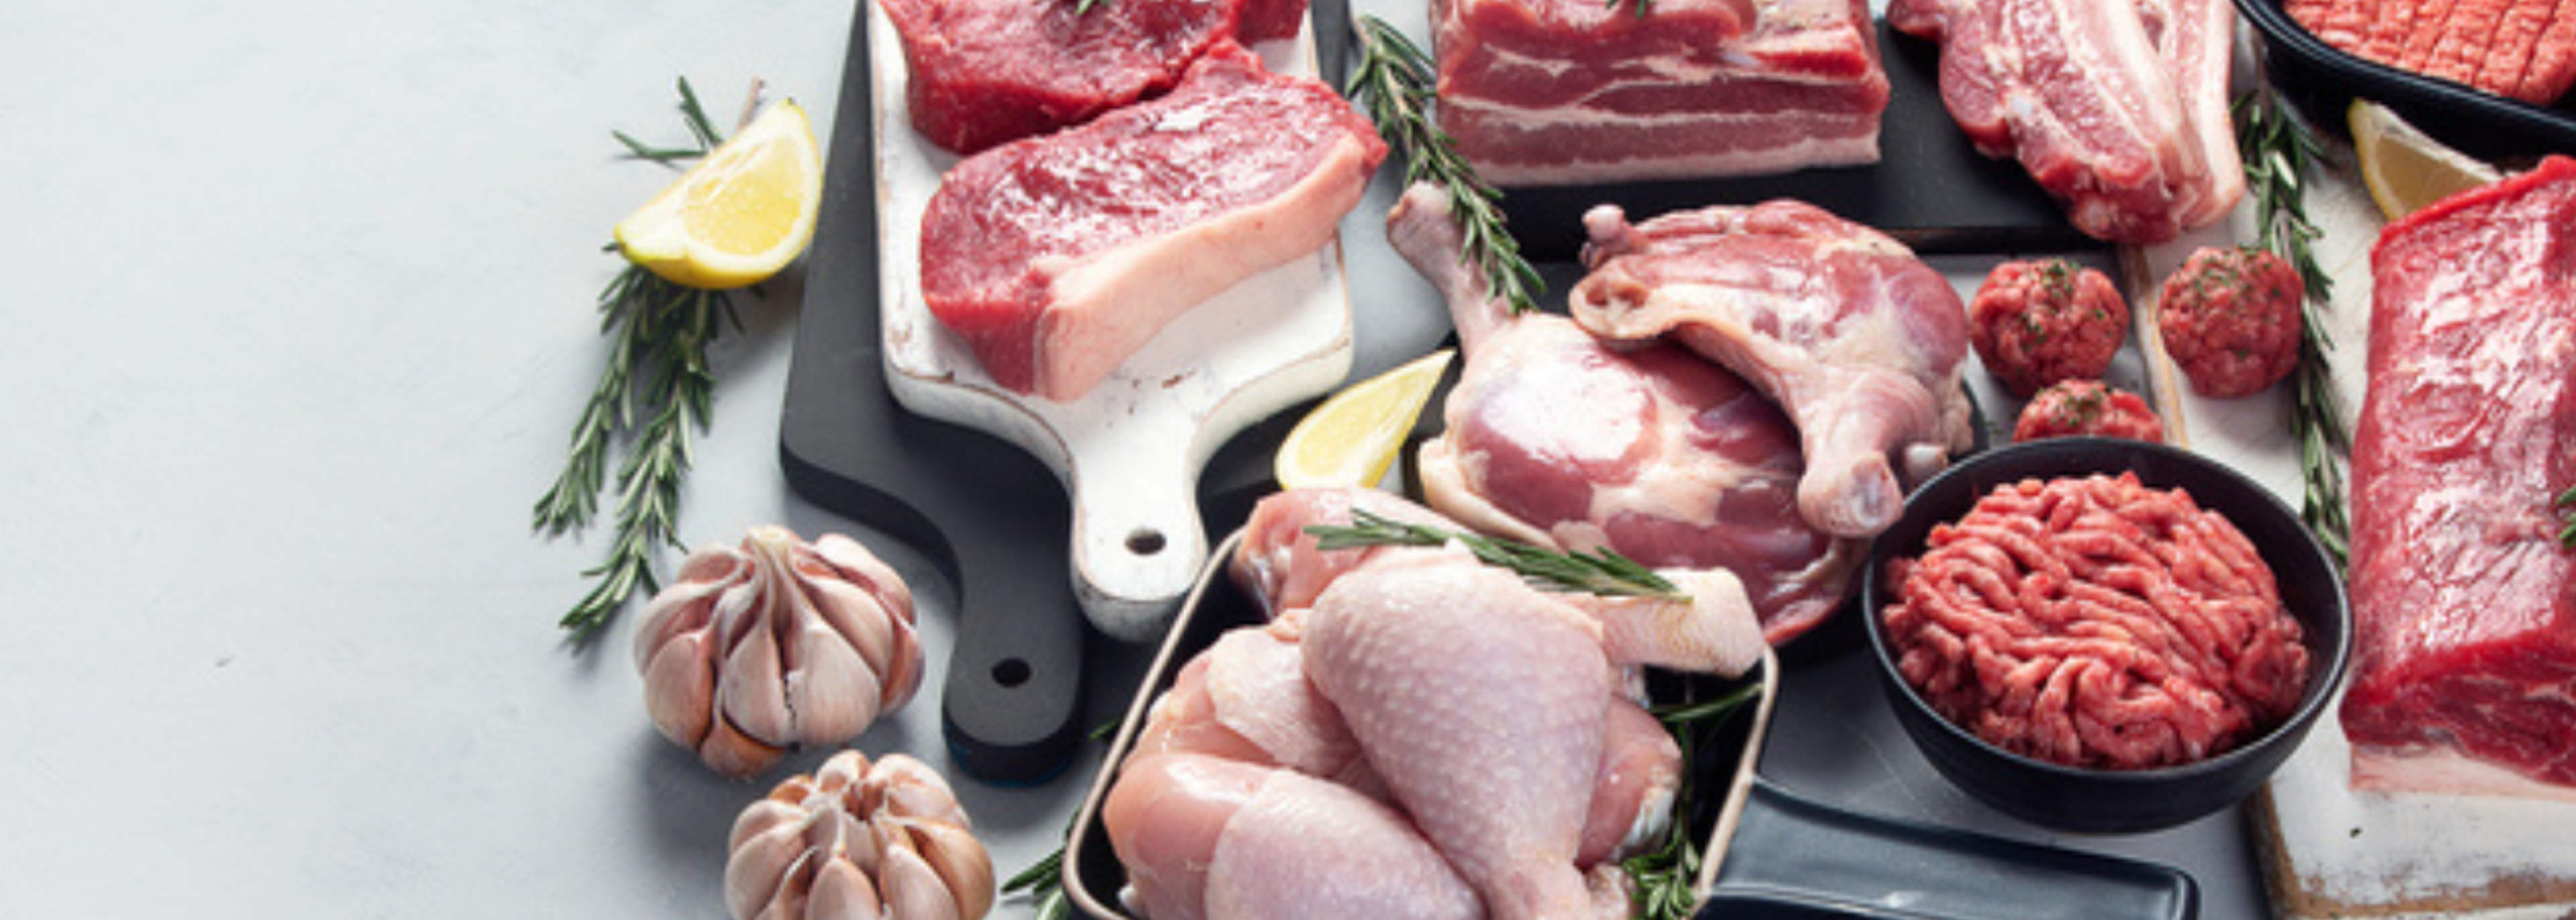 Widespread meat fraud scandal exposed by Farmers Weekly